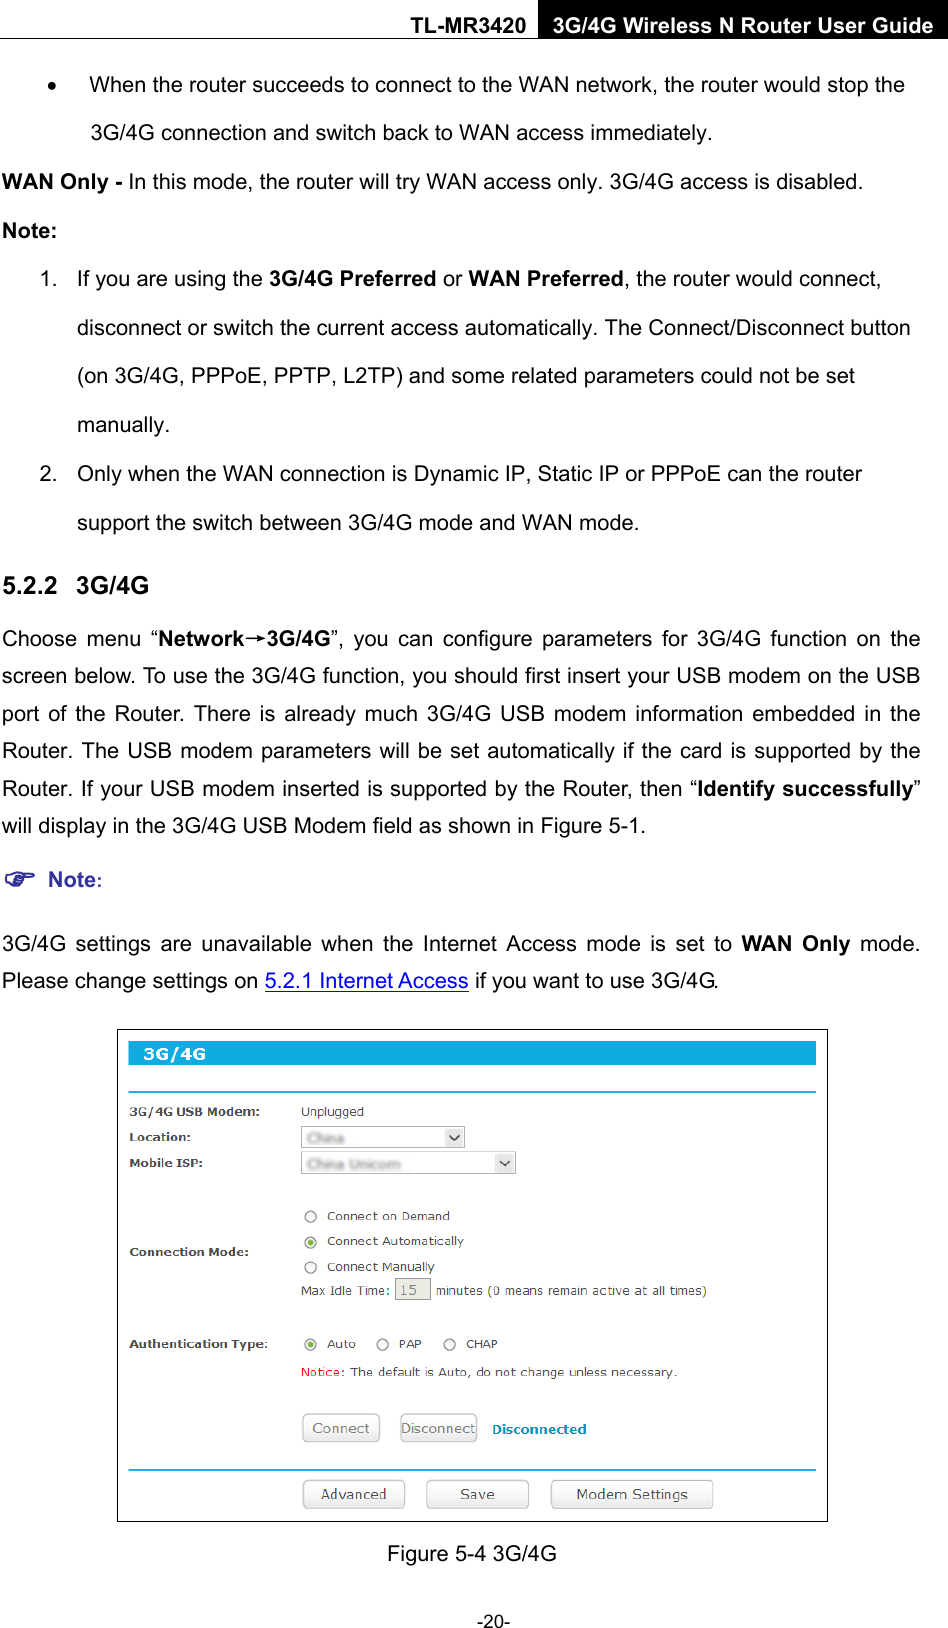    -20- TL-MR3420 3G/4G Wireless N Router User Guide • When the router succeeds to connect to the WAN network, the router would stop the 3G/4G connection and switch back to WAN access immediately. WAN Only - In this mode, the router will try WAN access only. 3G/4G access is disabled. Note: 1. If you are using the 3G/4G Preferred or WAN Preferred, the router would connect, disconnect or switch the current access automatically. The Connect/Disconnect button (on 3G/4G, PPPoE, PPTP, L2TP) and some related parameters could not be set manually. 2. Only when the WAN connection is Dynamic IP, Static IP or PPPoE can the router support the switch between 3G/4G mode and WAN mode. 5.2.2 3G/4G Choose menu “Network→3G/4G”, you can configure  parameters for 3G/4G function on  the screen below. To use the 3G/4G function, you should first insert your USB modem on the USB port of the Router. There is already much 3G/4G USB modem information embedded in the Router. The USB modem parameters will be set automatically if the card is supported by the Router. If your USB modem inserted is supported by the Router, then “Identify successfully” will display in the 3G/4G USB Modem field as shown in Figure 5-1.    Note: 3G/4G settings are unavailable when the Internet Access mode is set to WAN Only mode. Please change settings on 5.2.1 Internet Access if you want to use 3G/4G.  Figure 5-4 3G/4G 